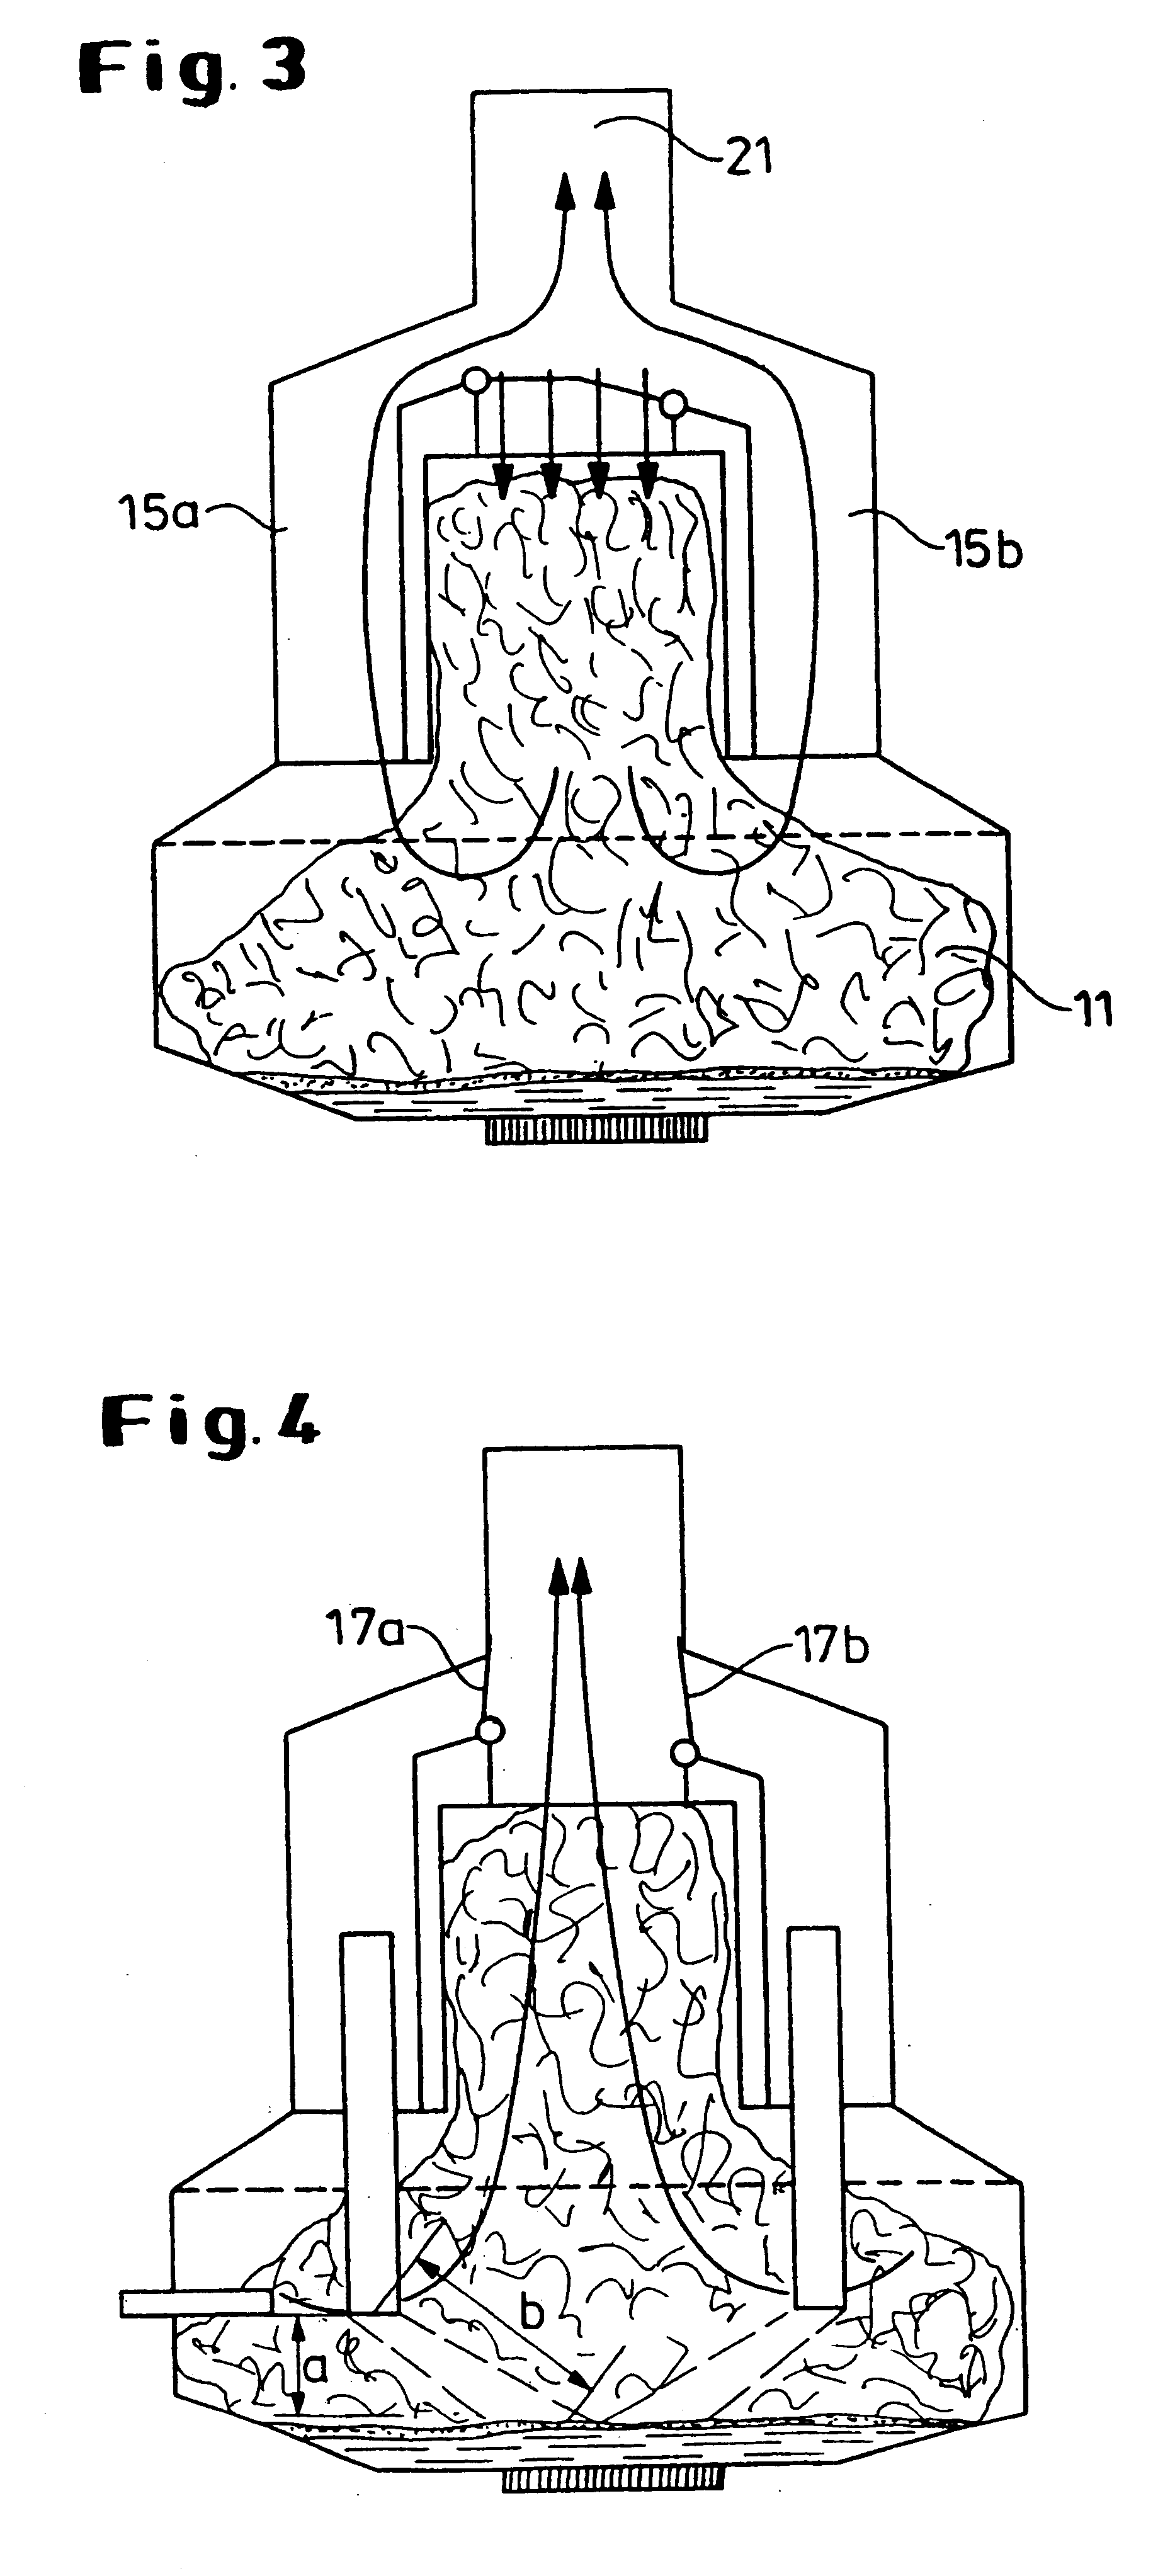 Direct-current arc furnace comprising a centric charging shaft for producing steel and a method therefor